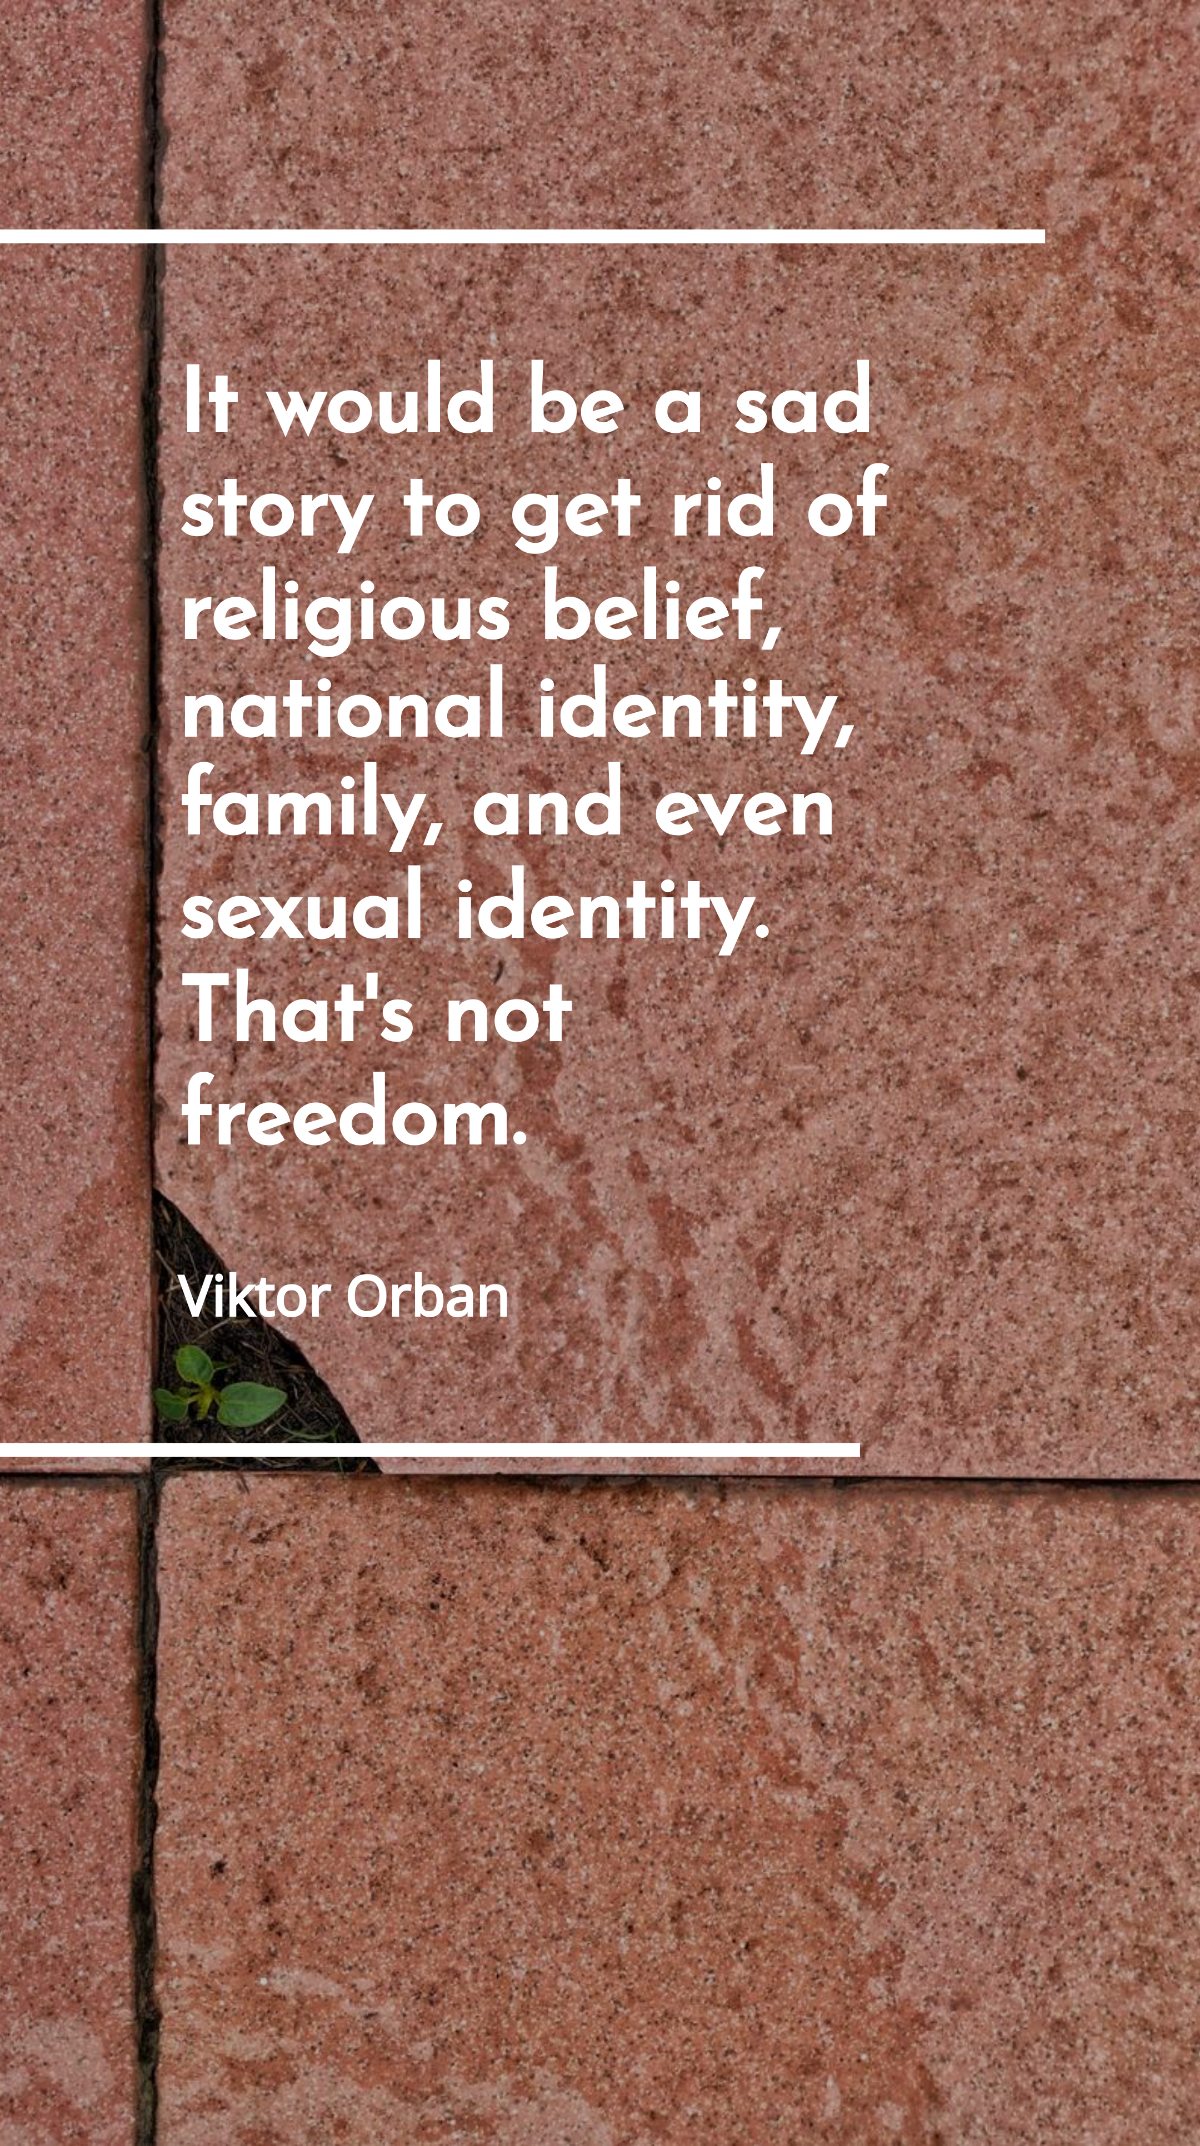 Viktor Orban - It would be a sad story to get rid of religious belief, national identity, family, and even sexual identity. That's not freedom. Template